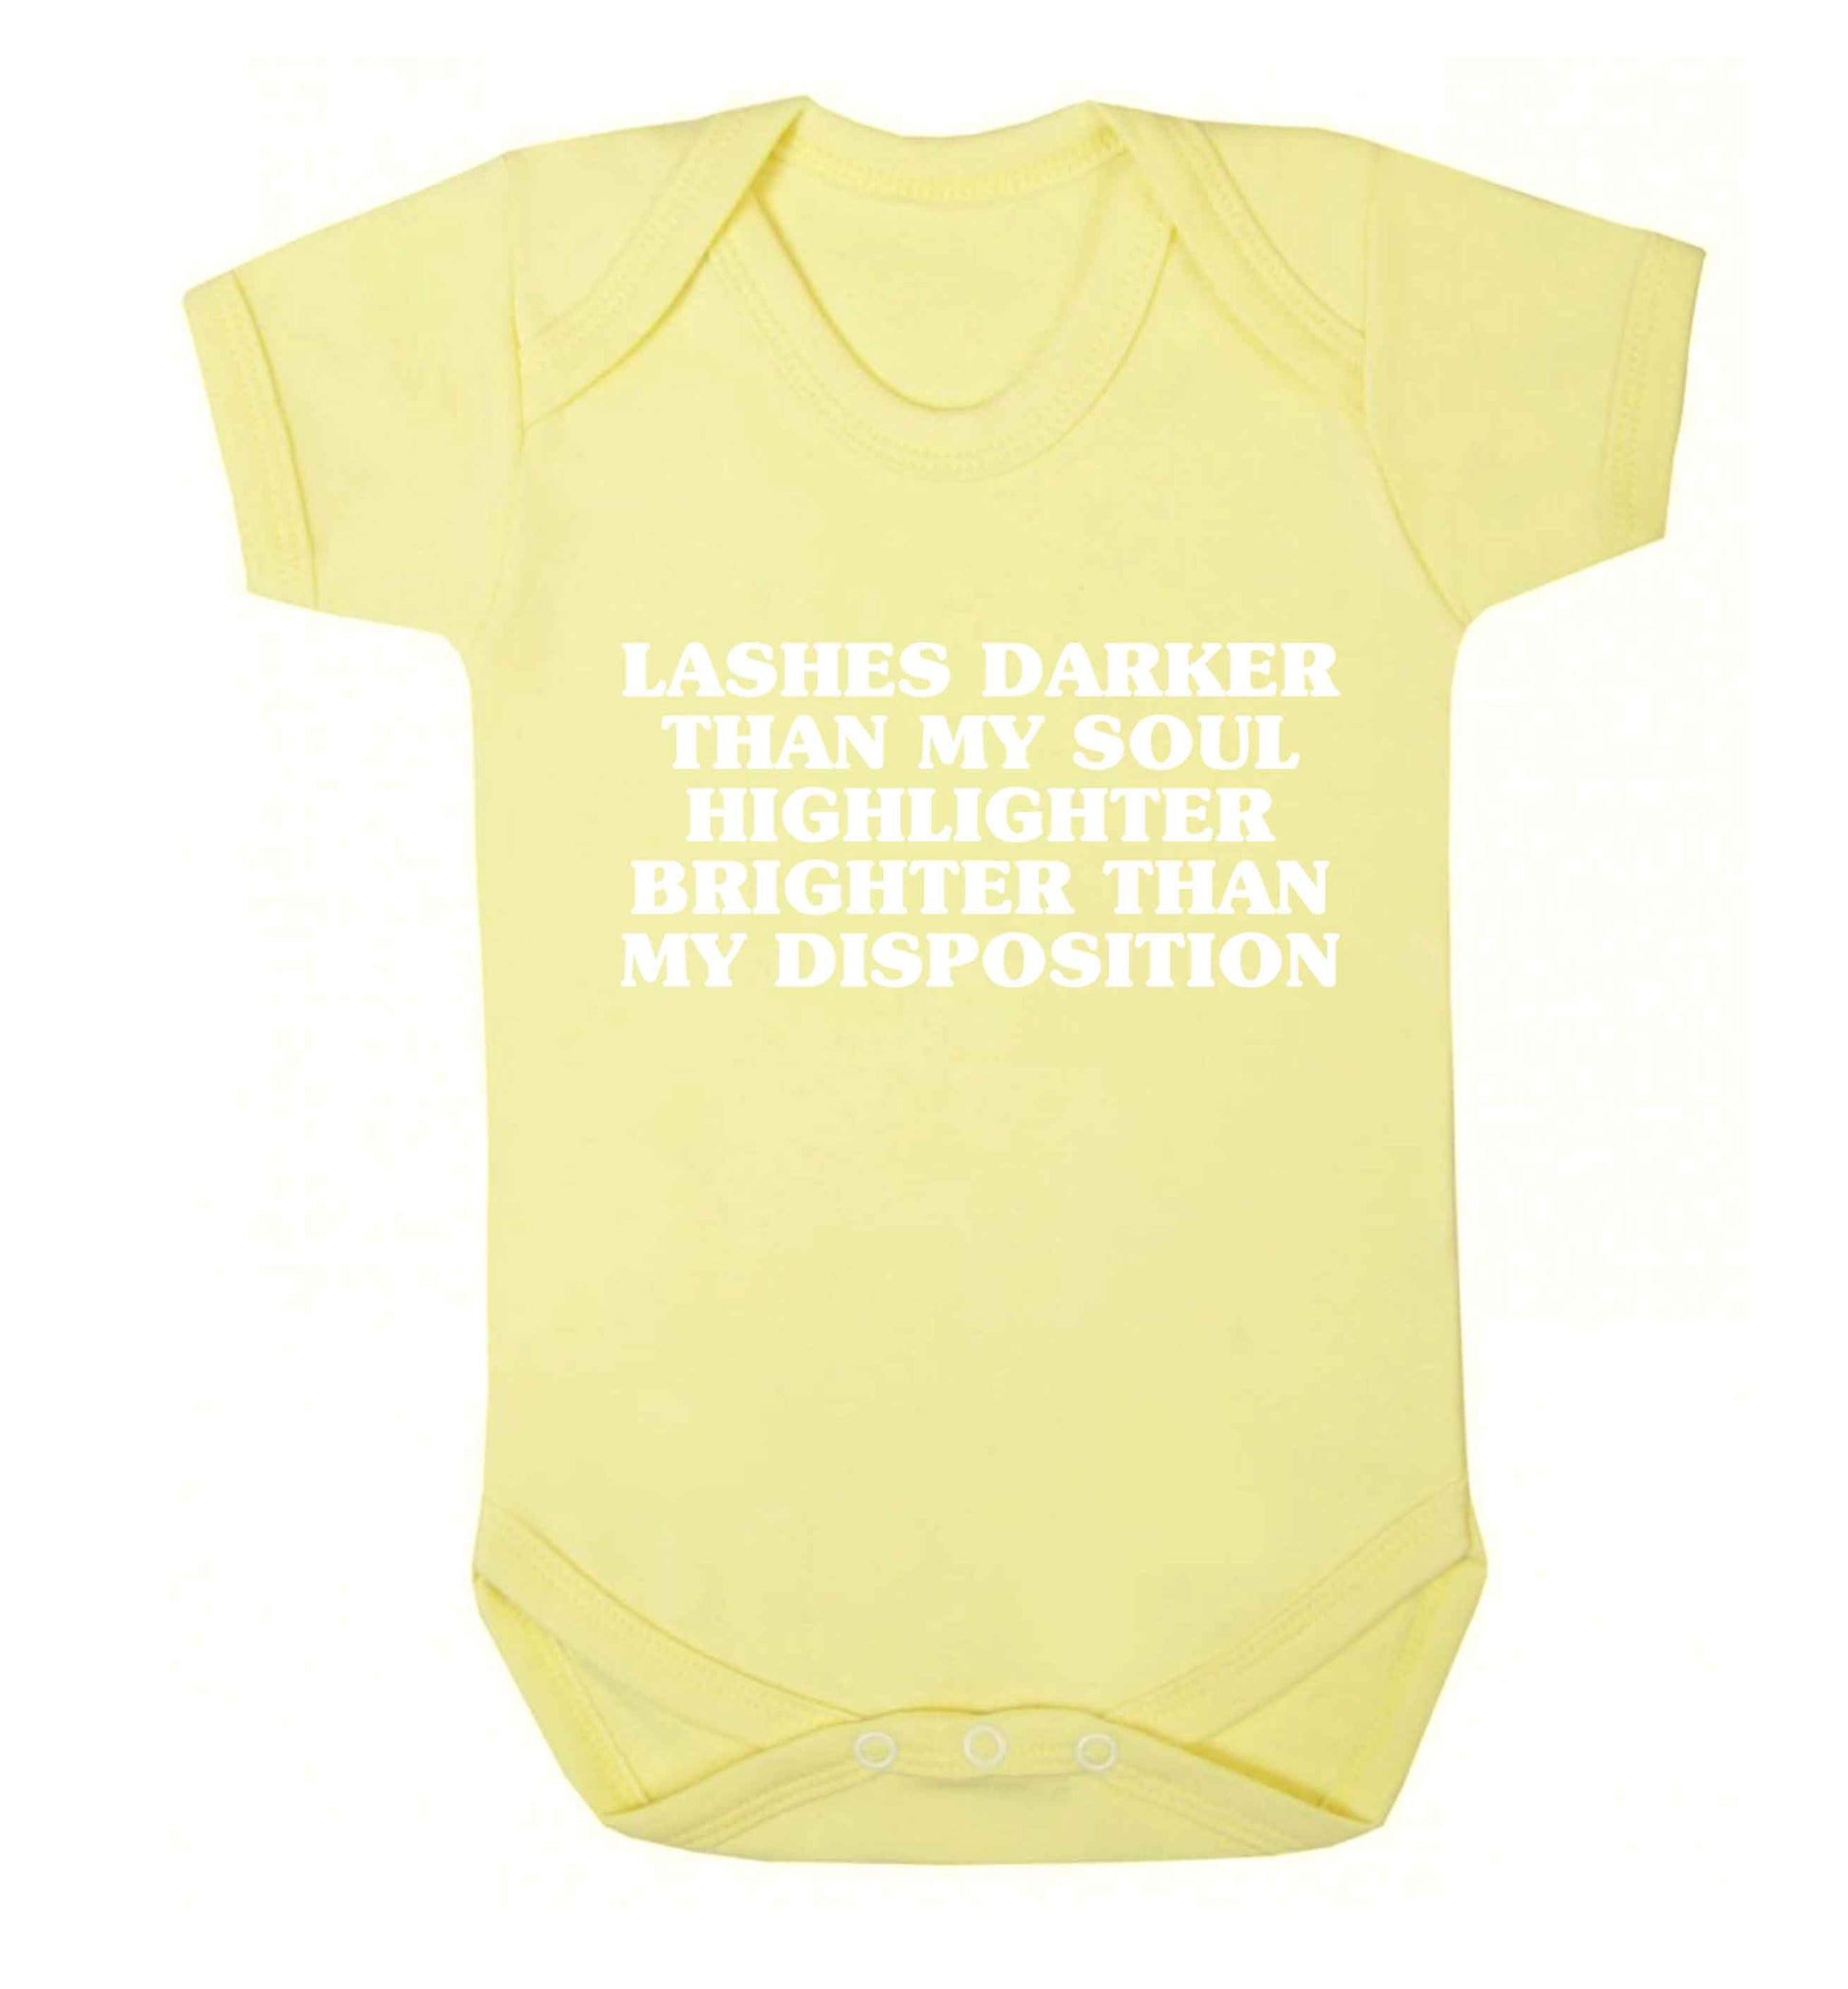 Lashes darker than my soul, highlighter brighter than my disposition Baby Vest pale yellow 18-24 months